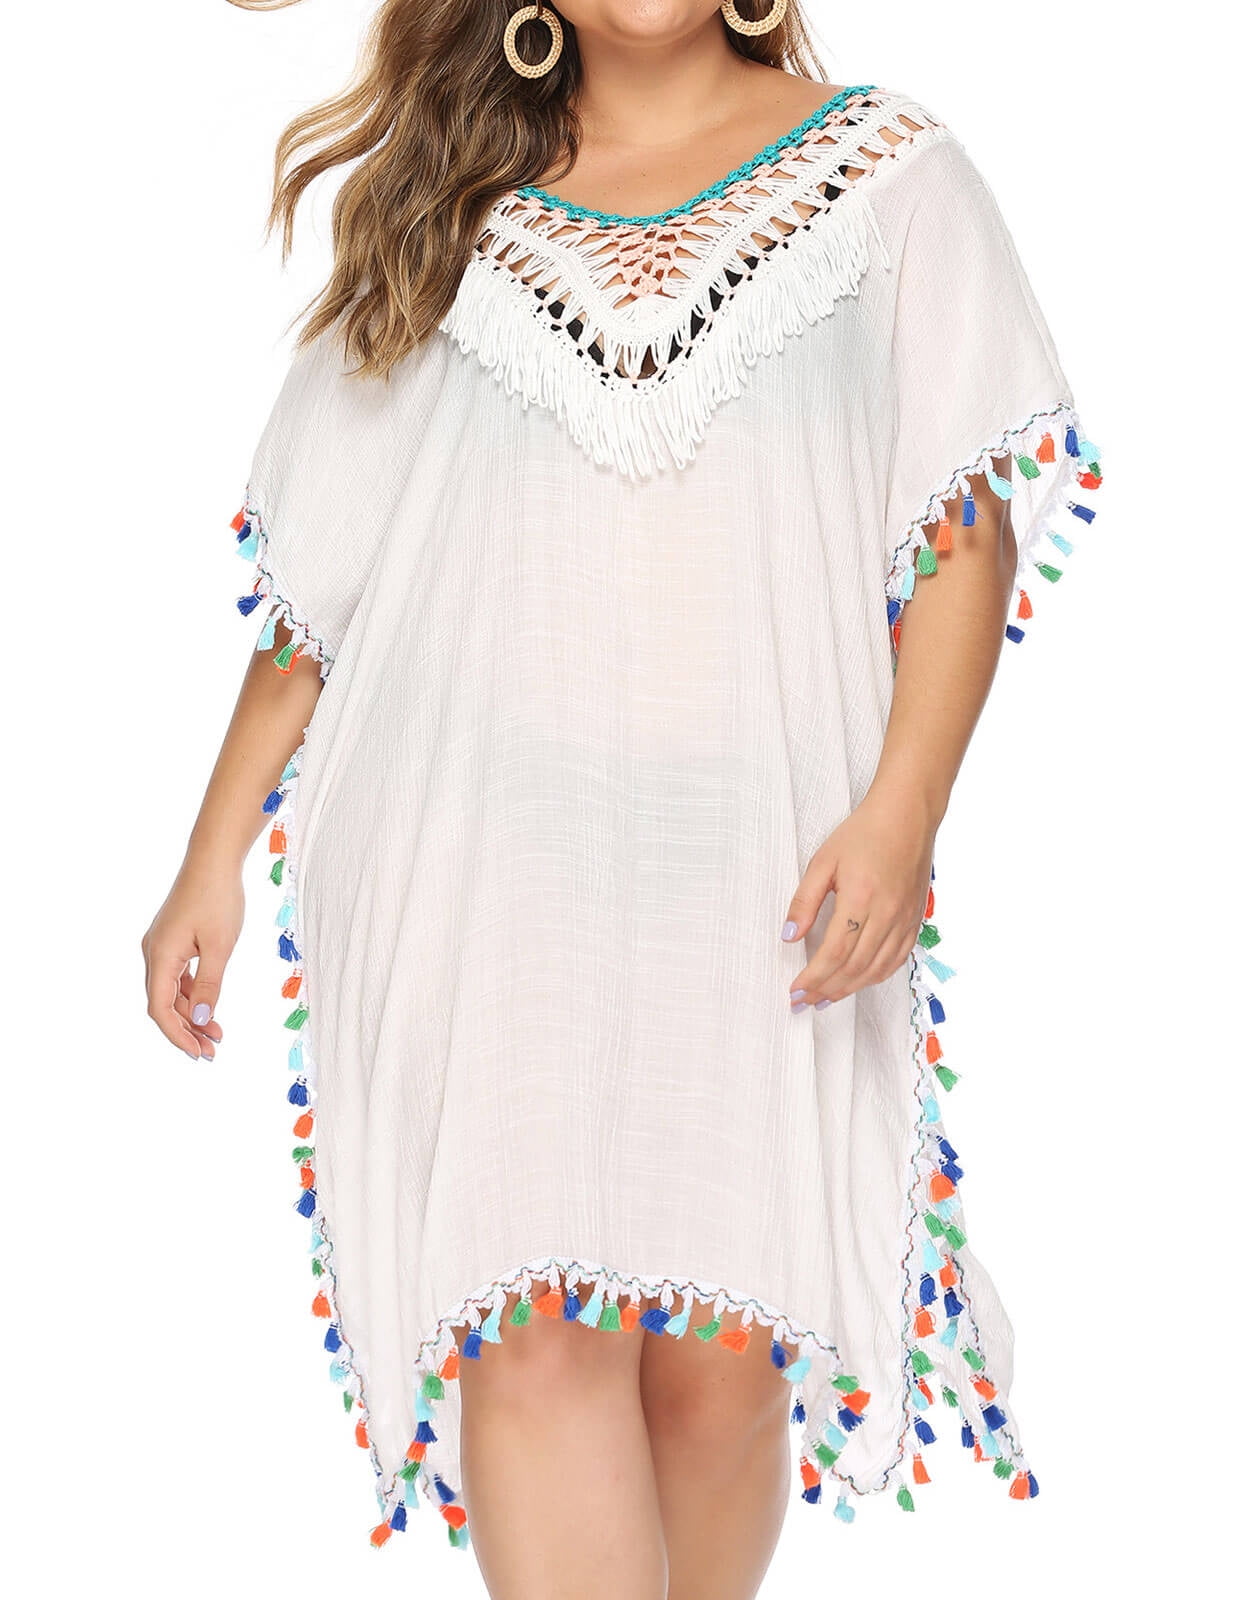 Plus Size Xl 3xl Swimsuit Cover Ups Womens Sexy Bathing Suit Cover Up Crochet Hollow Out V Neck